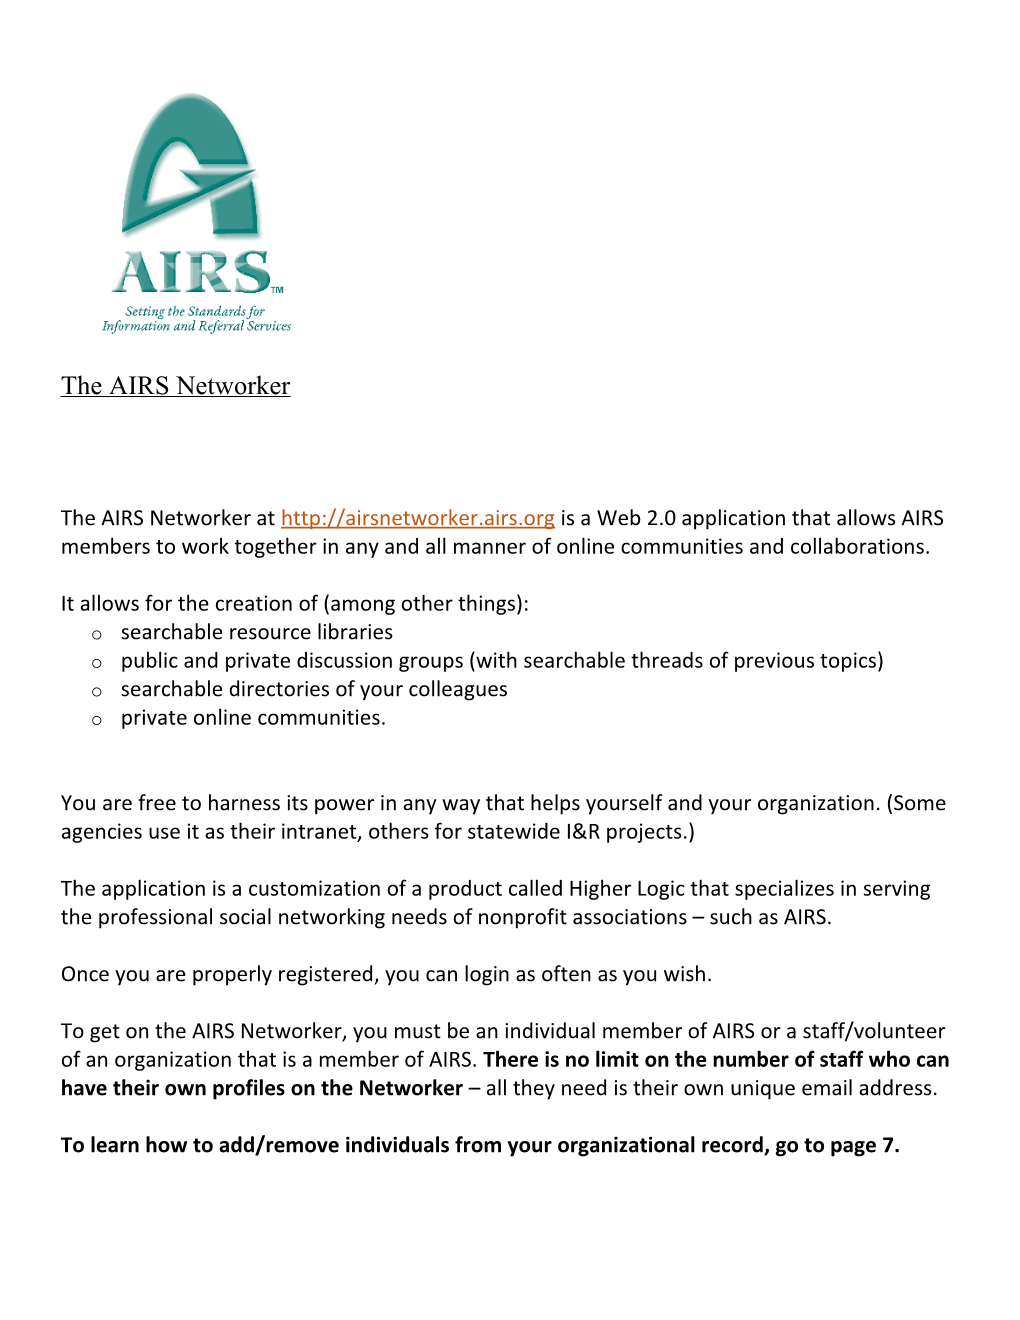 The New AIRS Networker